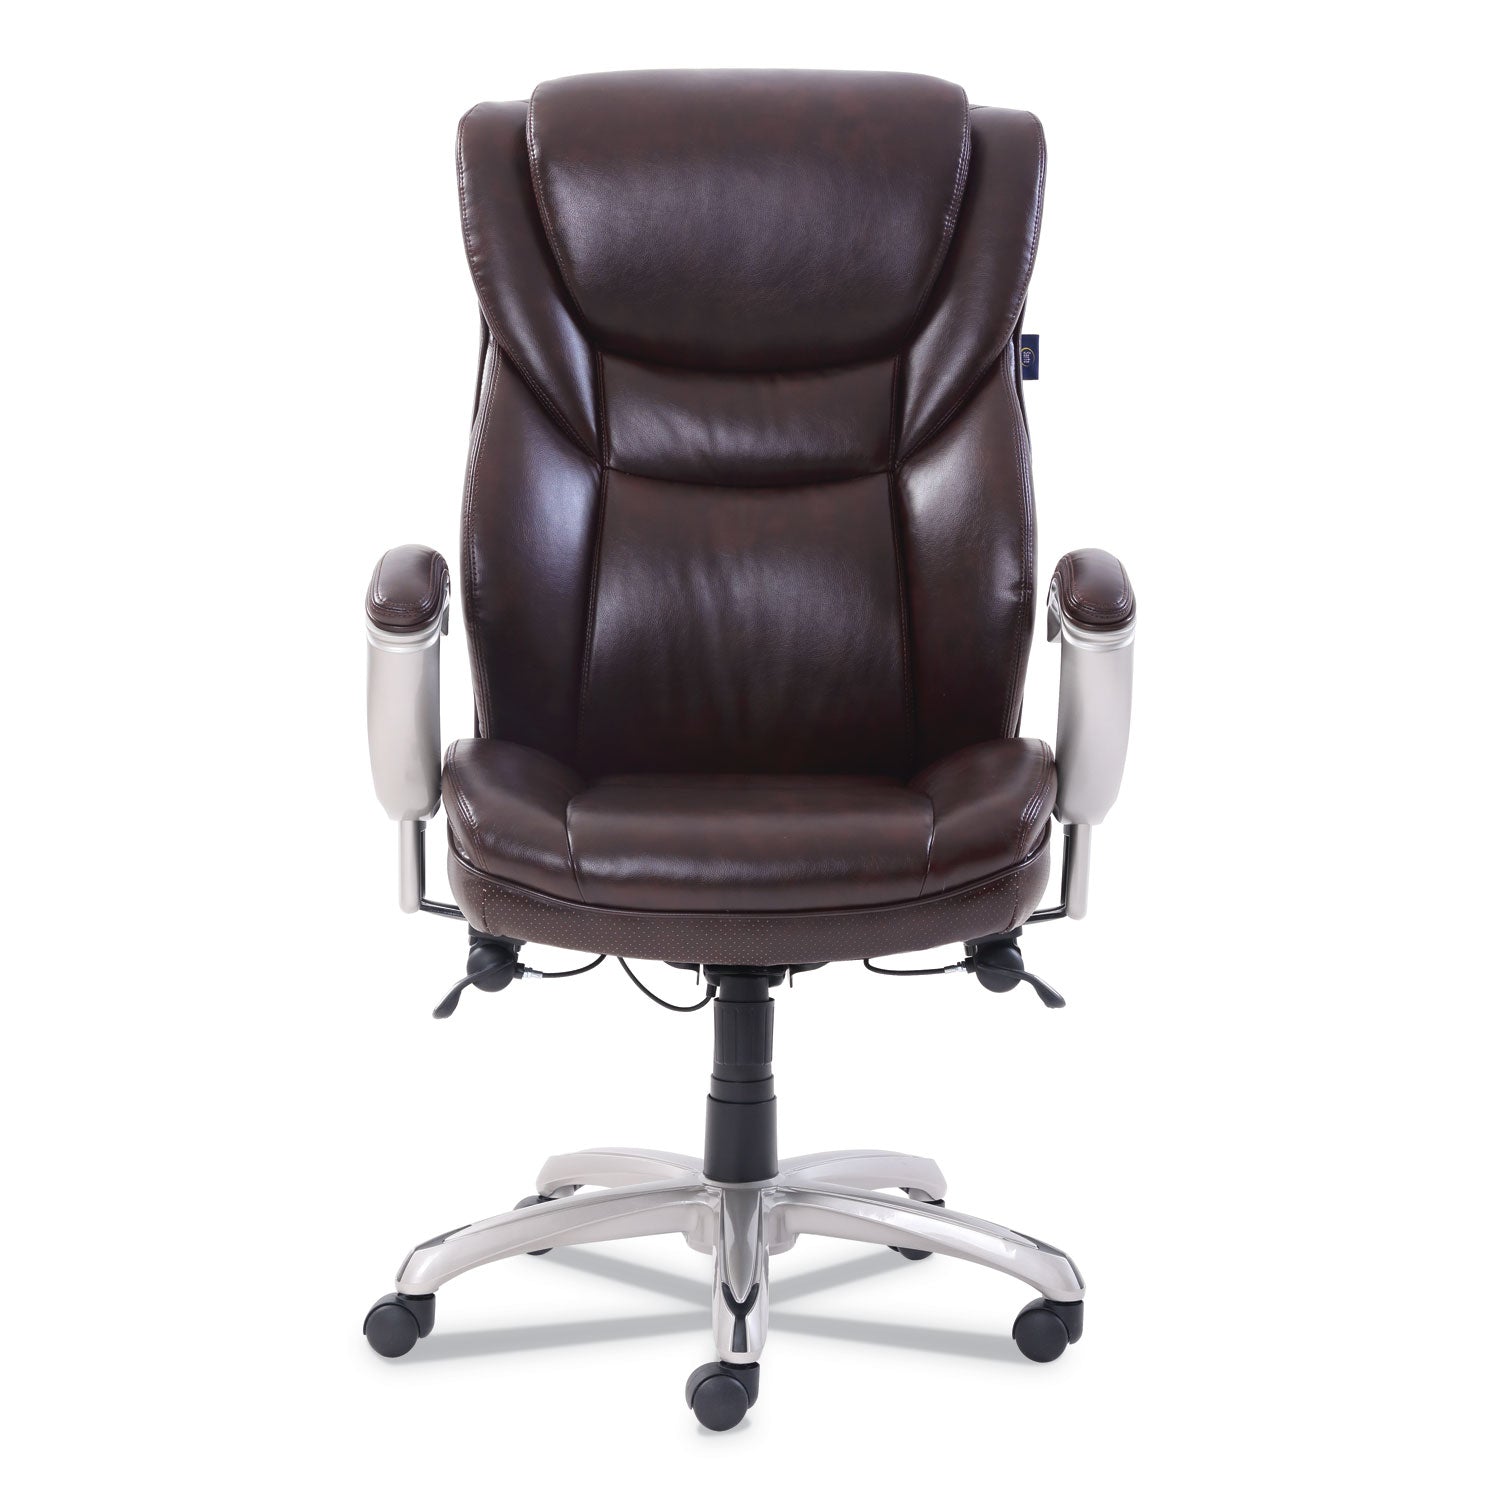 emerson-executive-task-chair-supports-up-to-300-lb-19-to-22-seat-height-brown-seat-back-silver-base_srj49710brw - 2